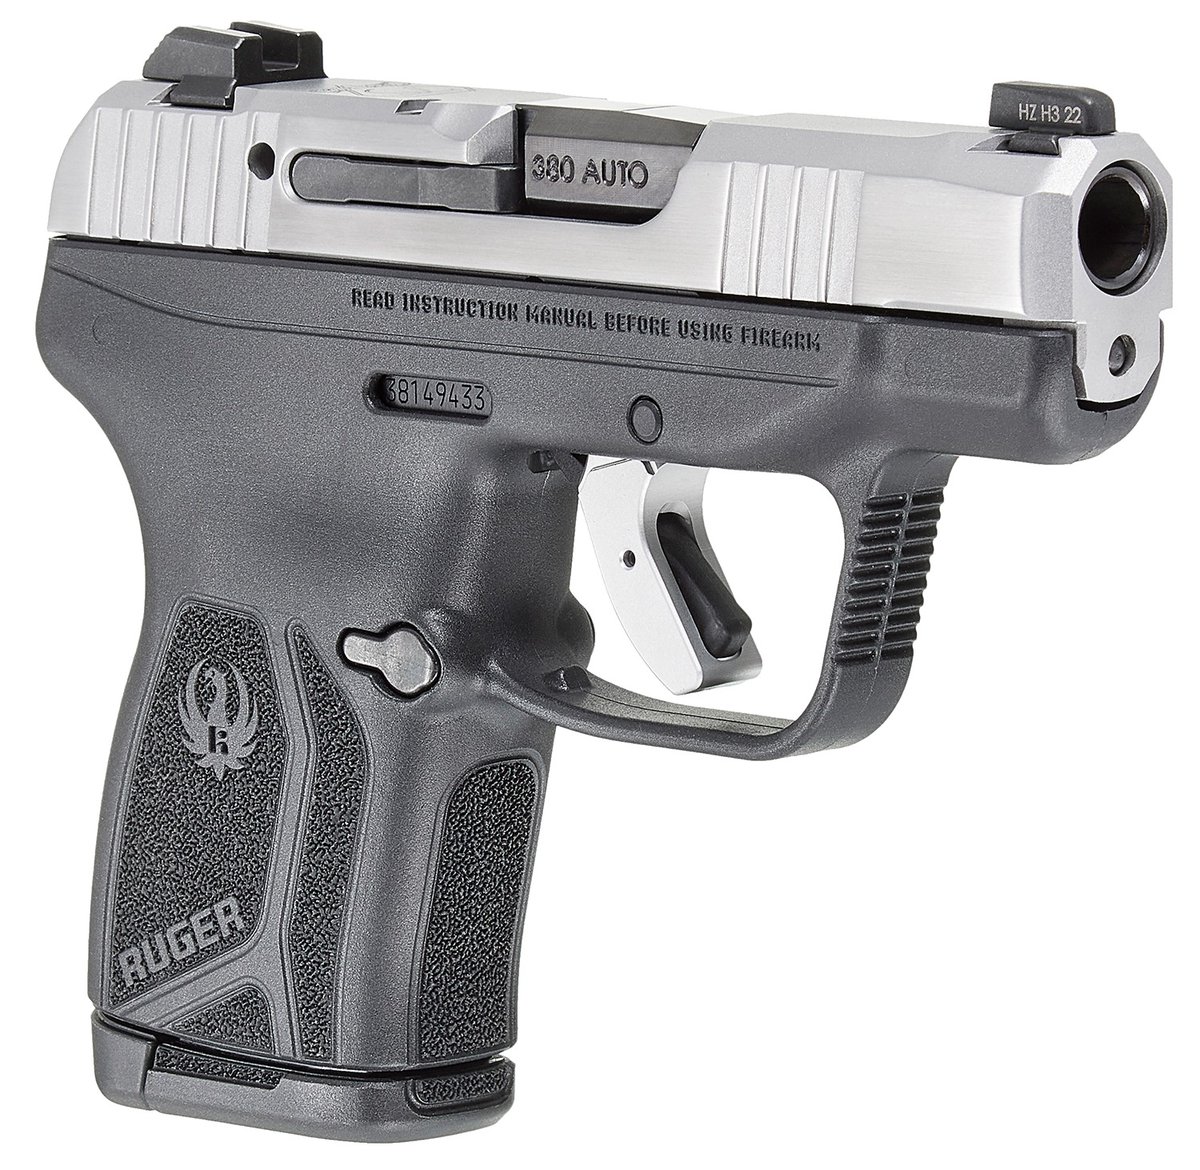 Ruger 10/12+1 LCP Max 380ACP with stainless slide & tritium front sight for $277 shipped currently here: mrgunsngear.org/3xqdFdc

#EDC #ConcealedCarry #PocketKing